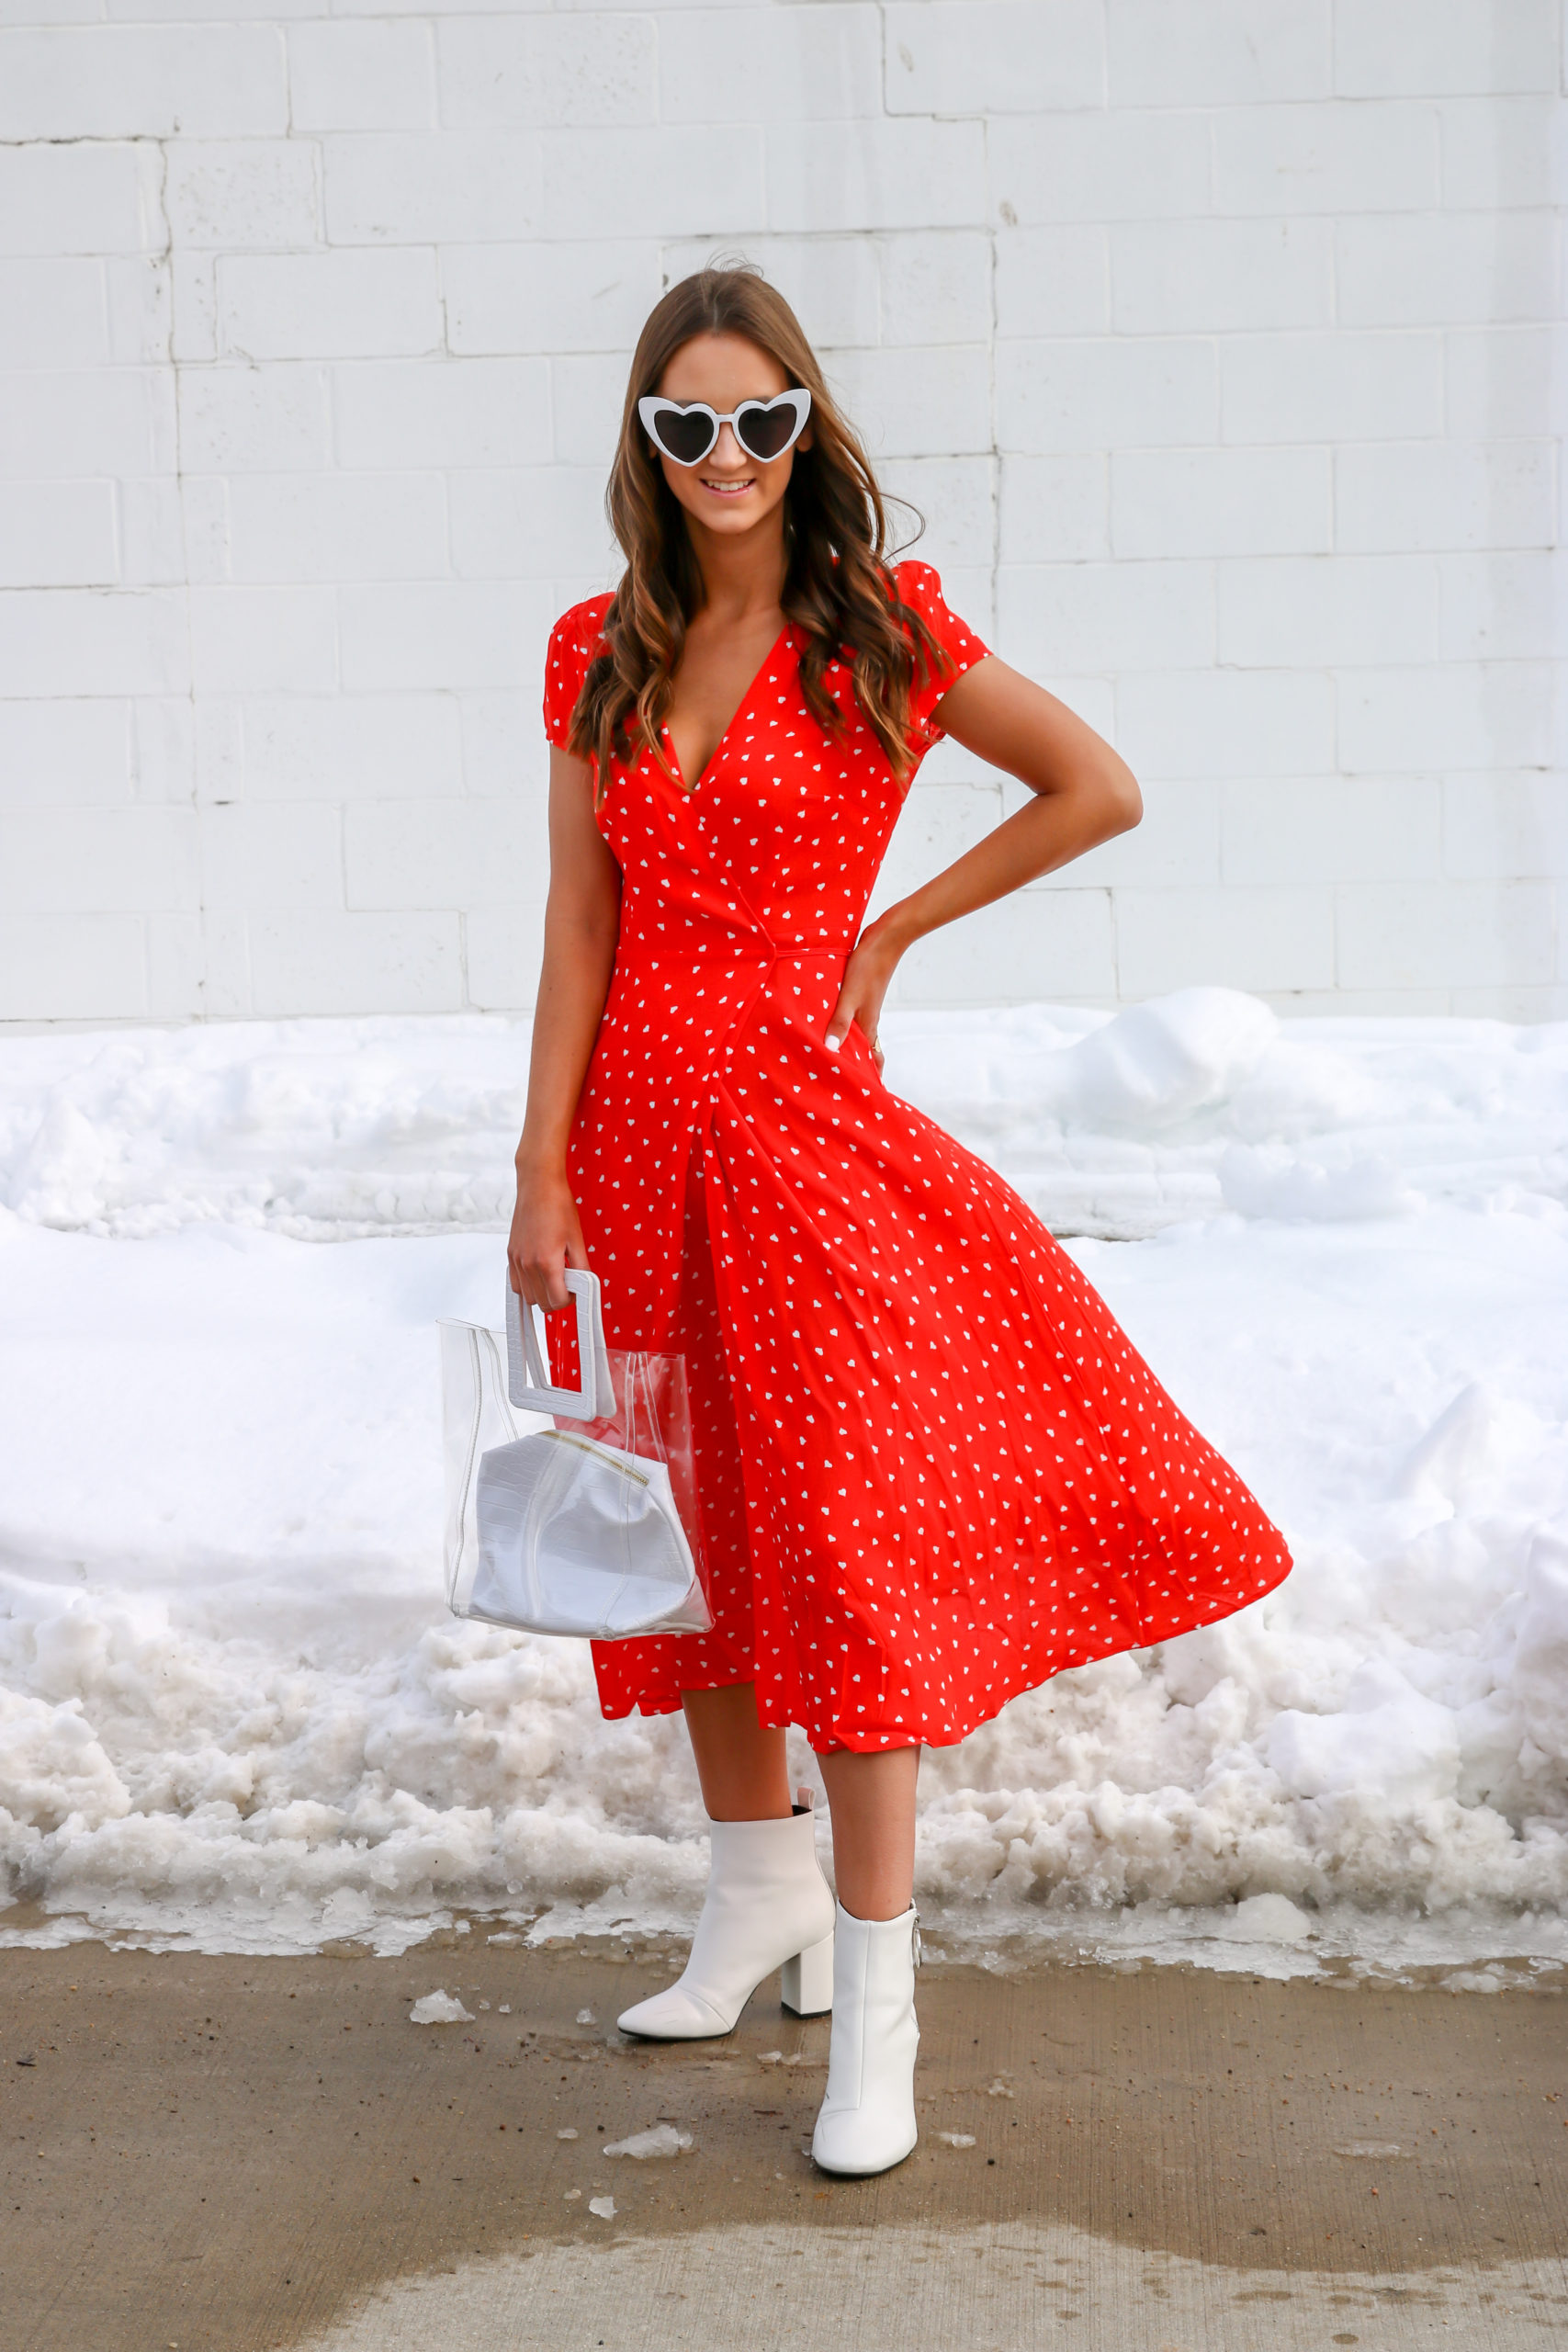 Fairytale Bow Dress by kate spade new york for $60